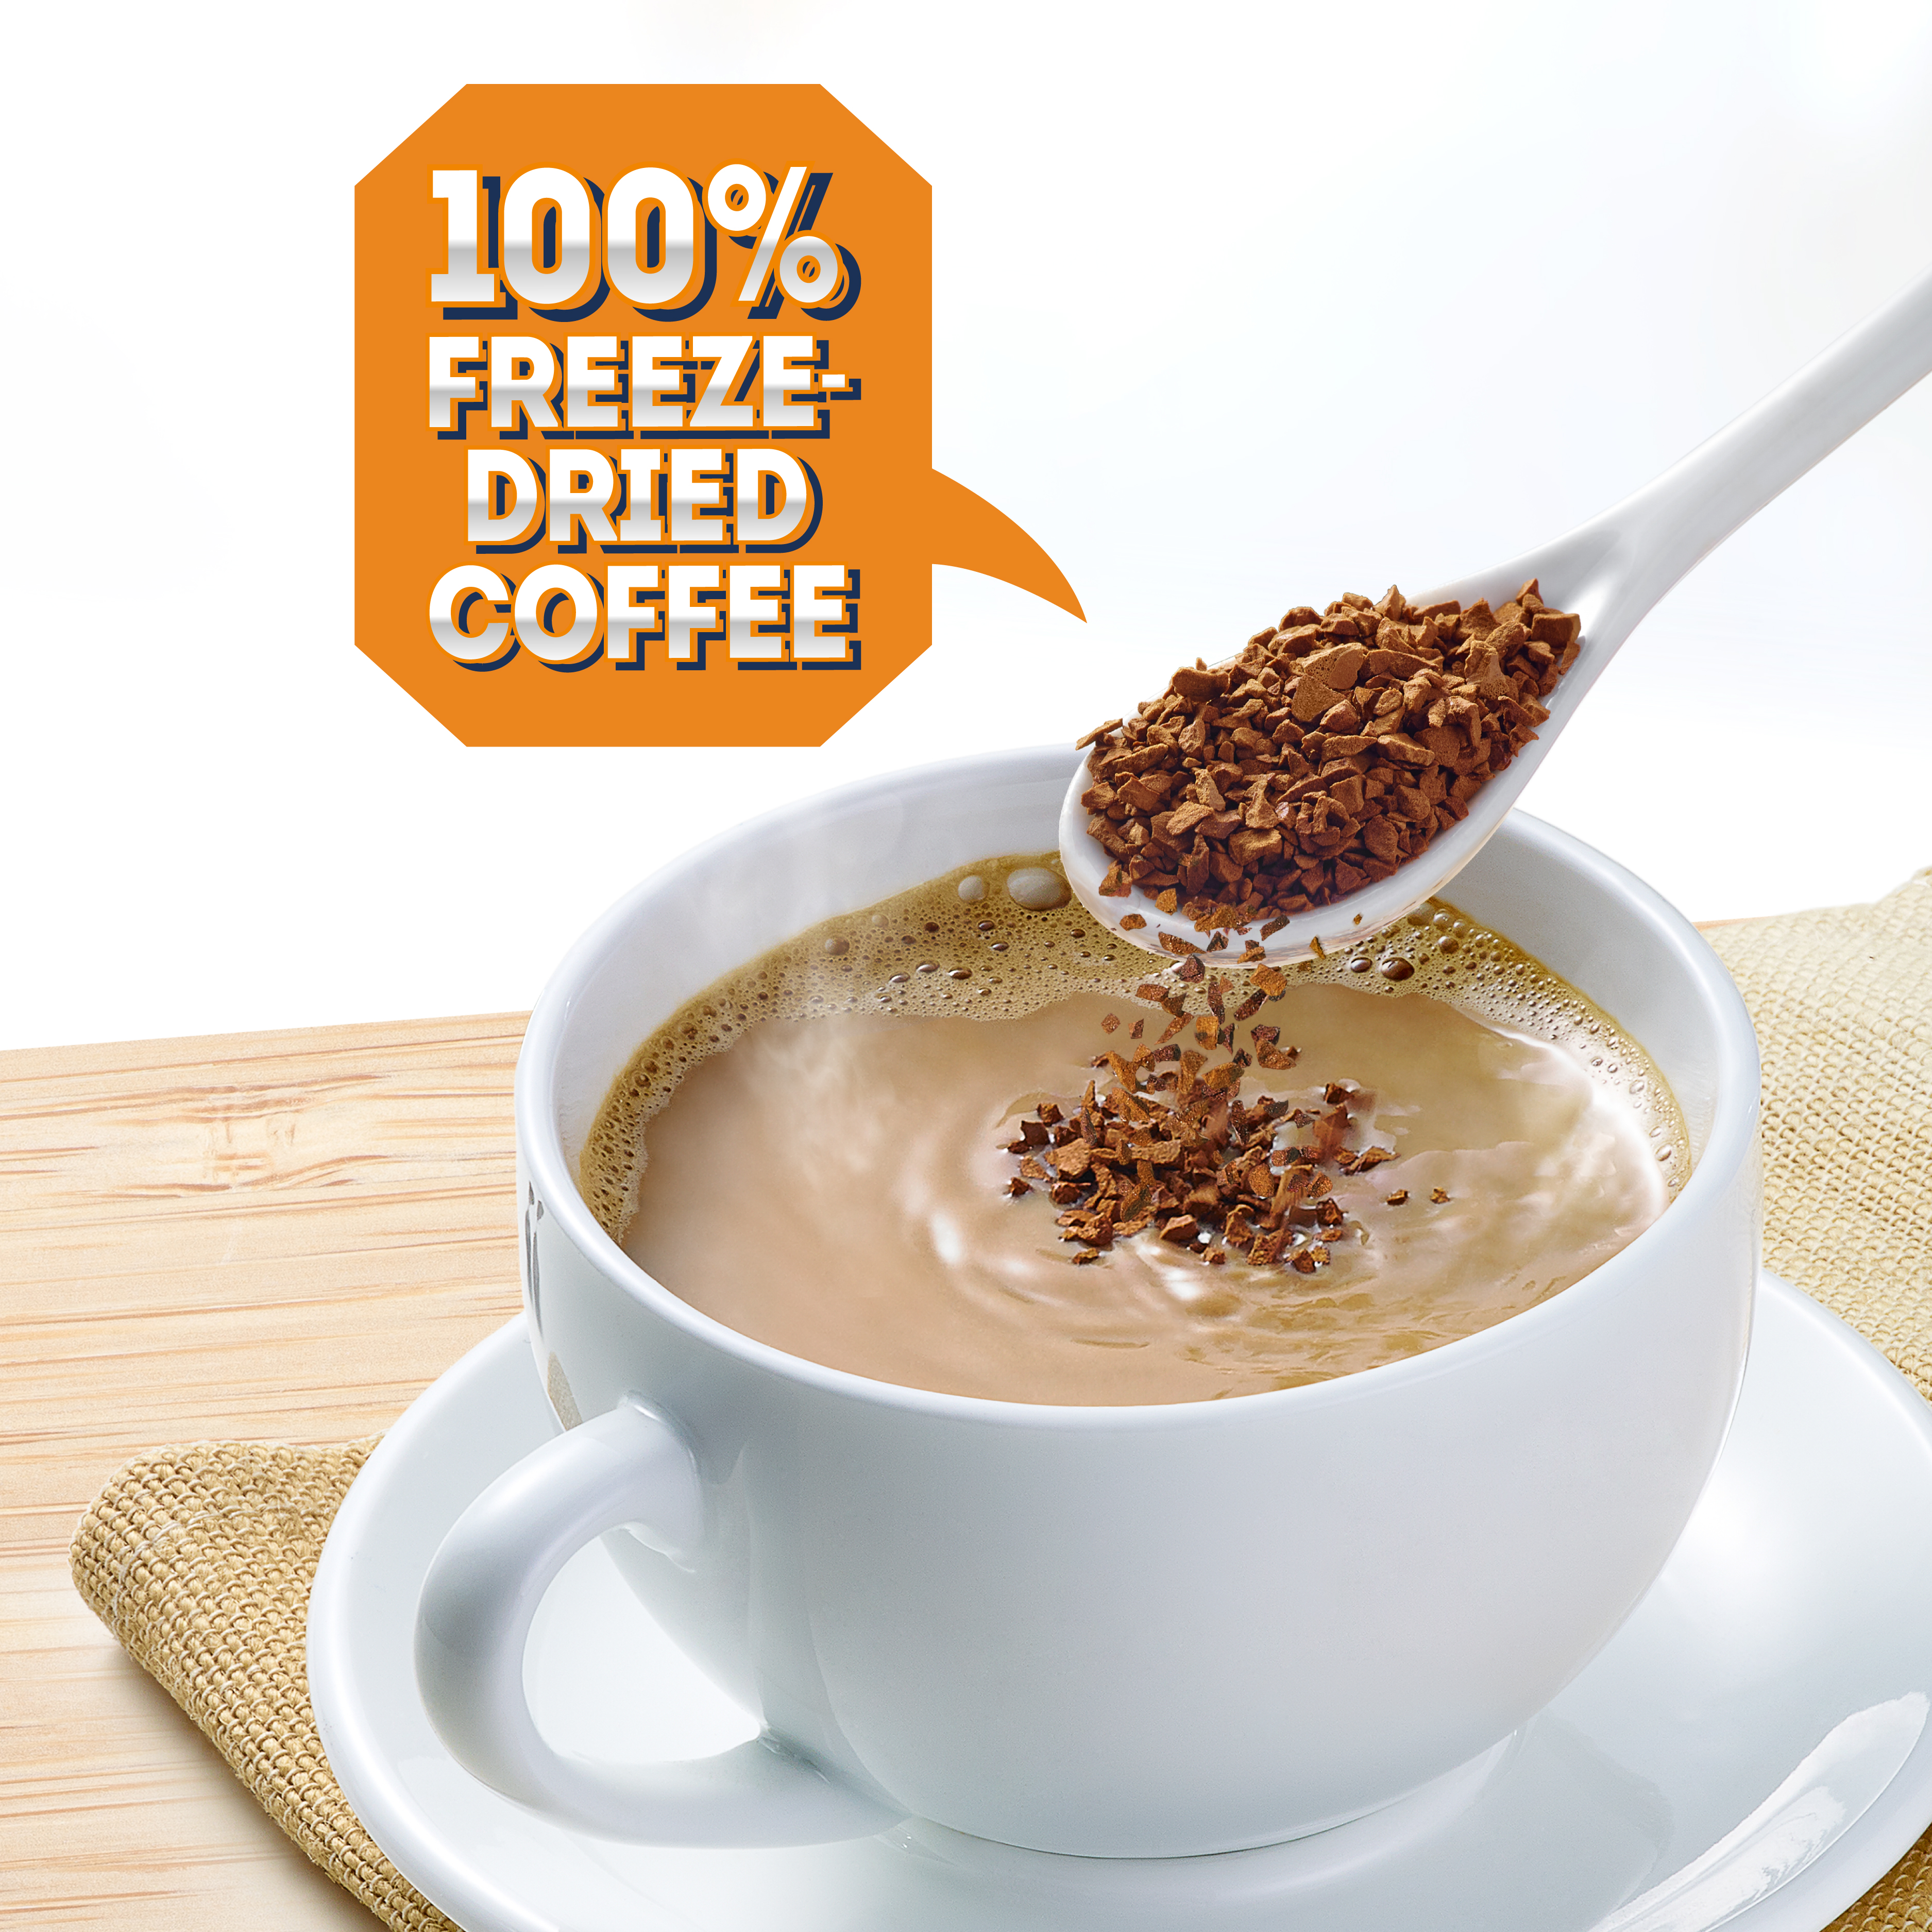 OWL 3in1 Instant Coffee - Everyday Favourites with 100% Freeze-Dried Coffee Regular, 30 sticks